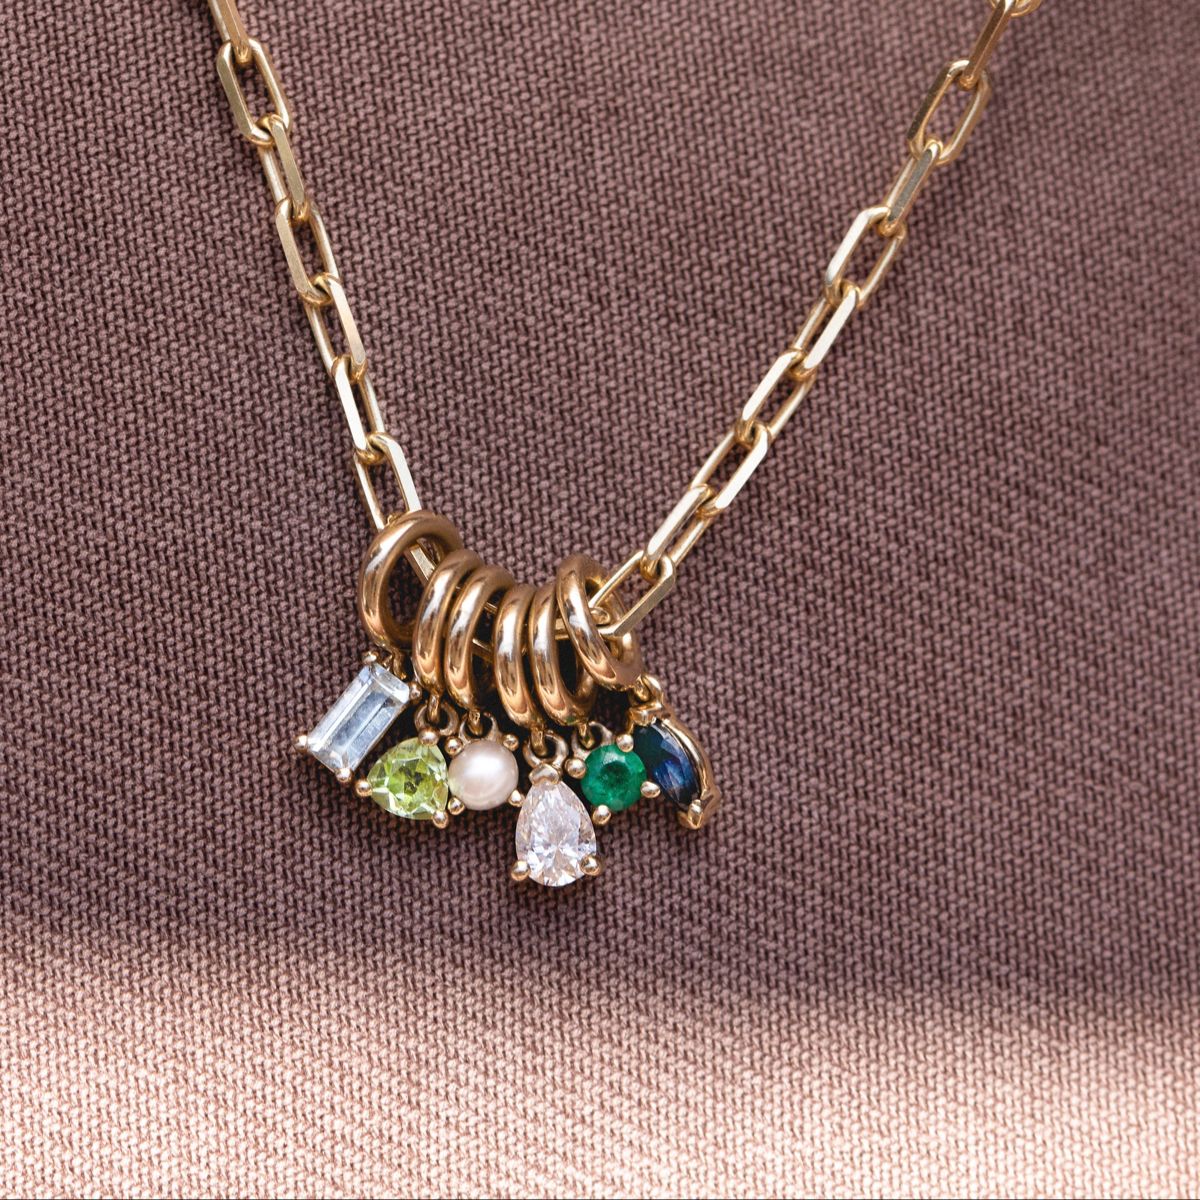 Add elegant designs of Charm necklace to your style